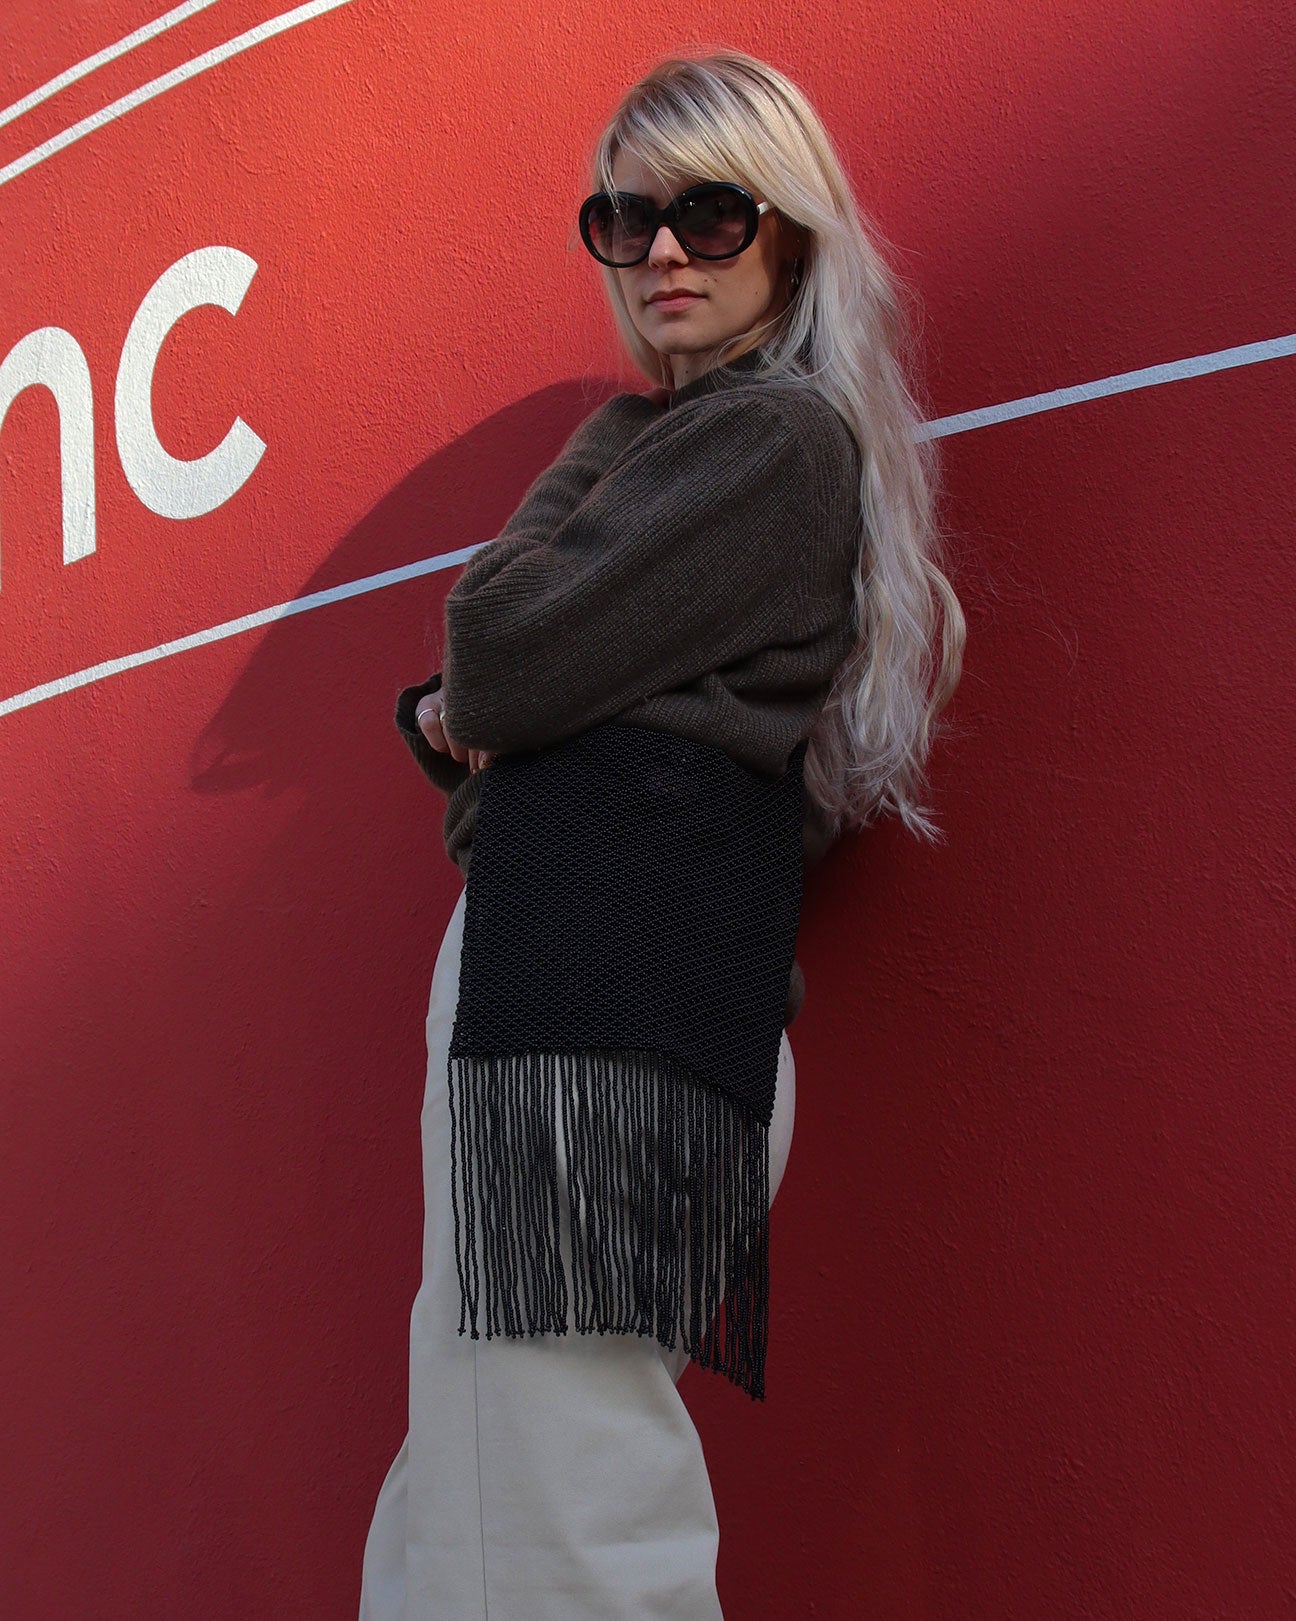 Marmaclub Crossover Fringe Black bag with model in white trousers in front of a red wall